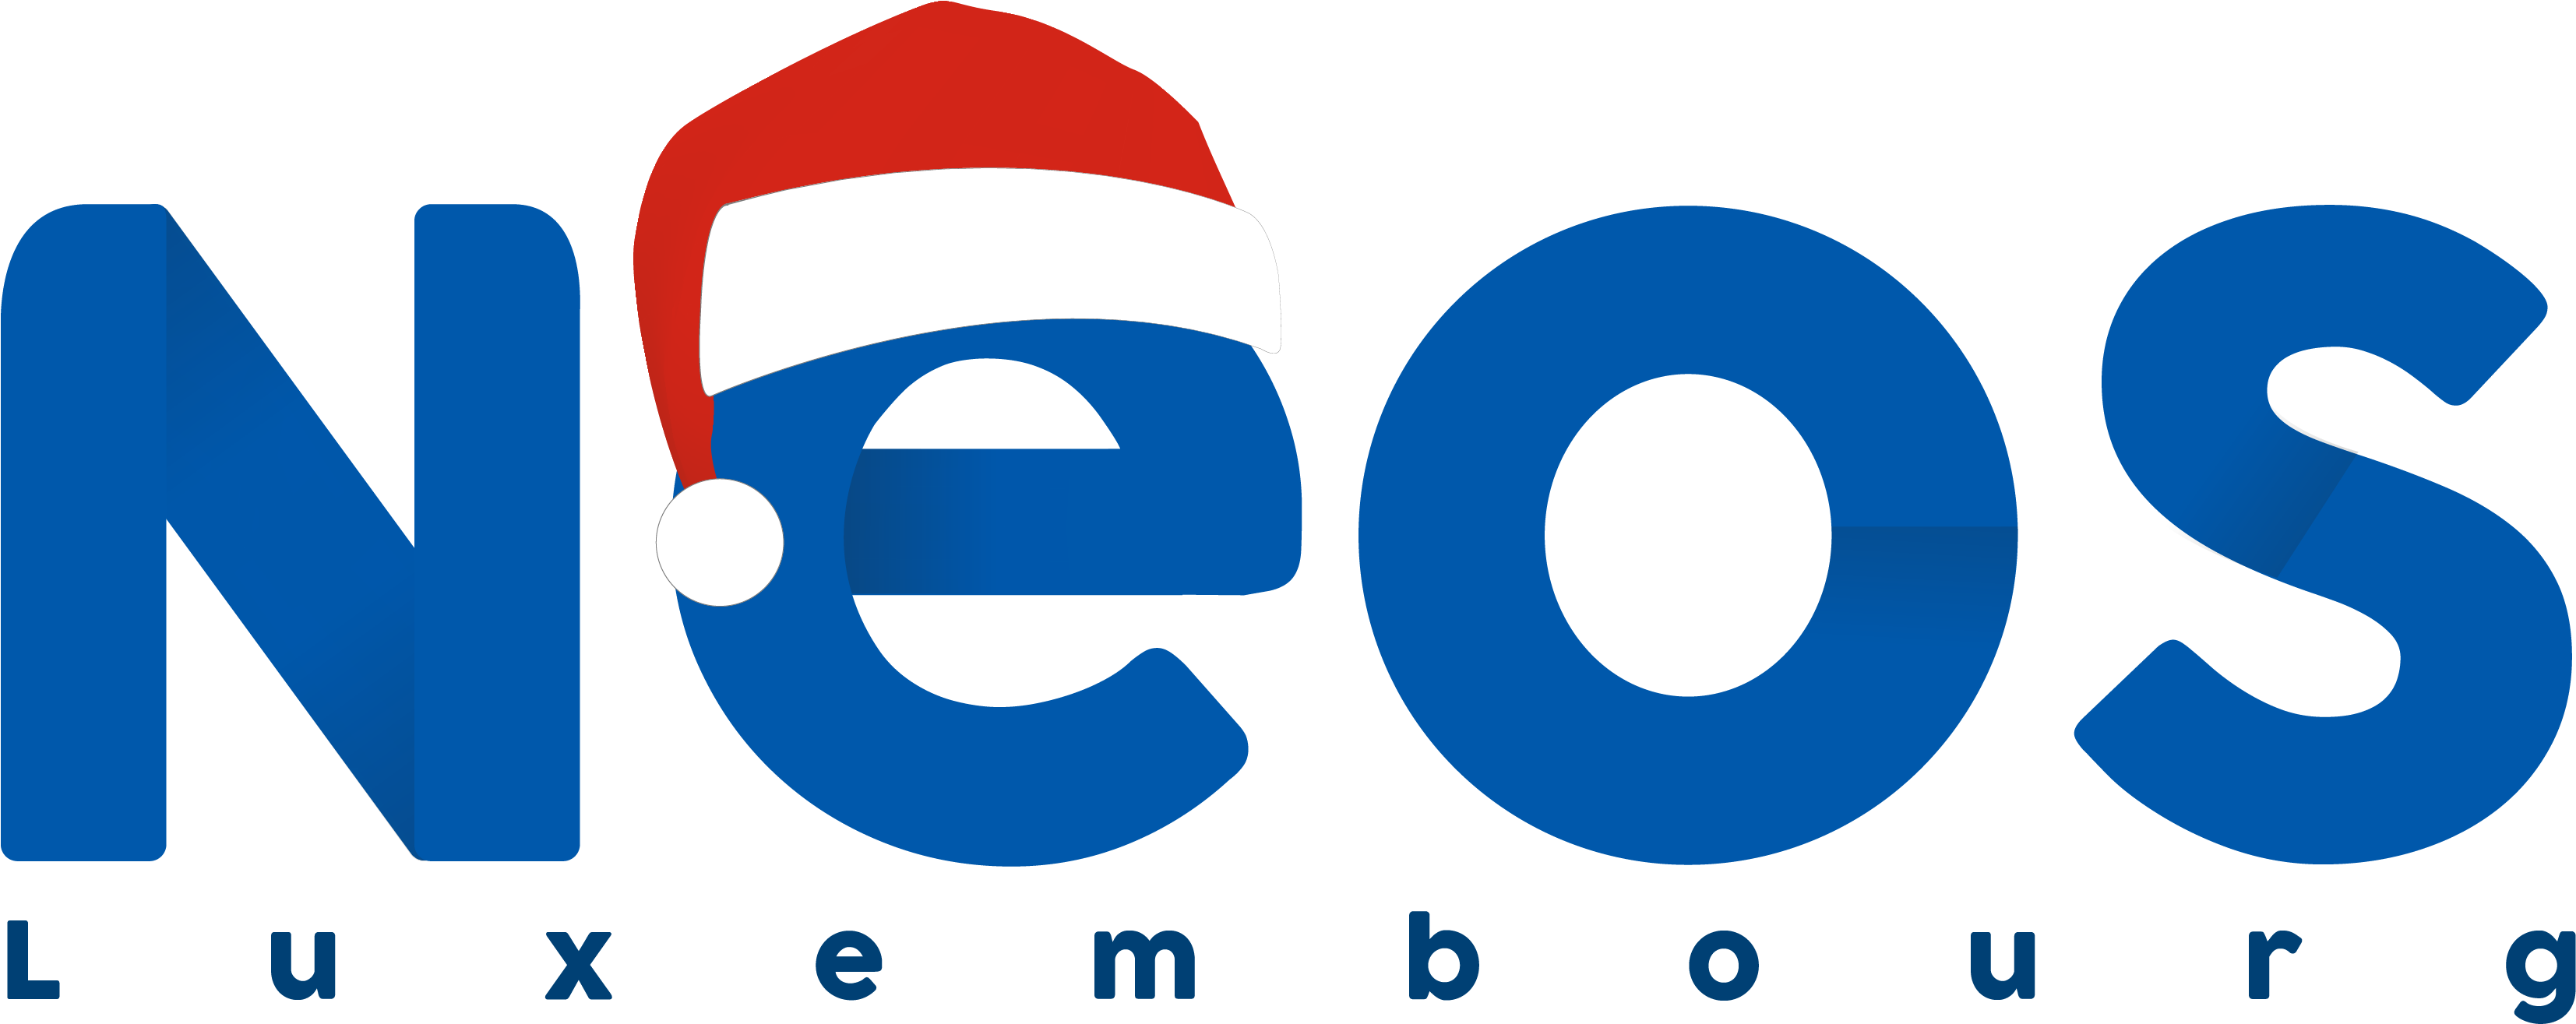 Neos Luxembourg ☆ Season's Greetings And News From - Luxembourg (3572x1339)